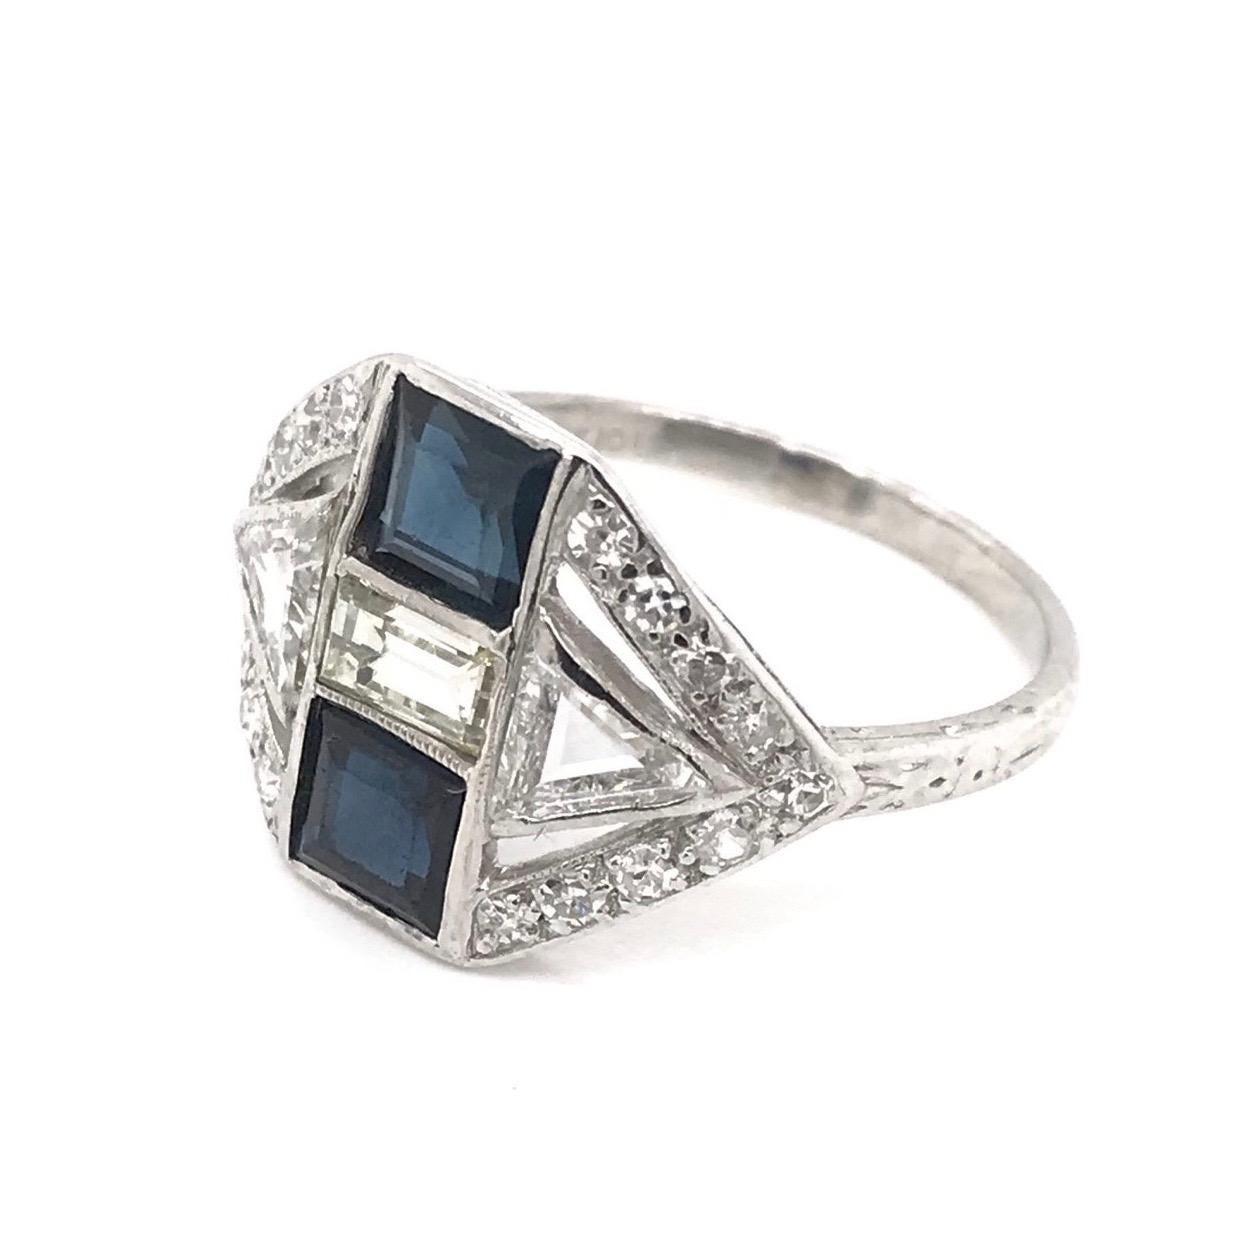 This antique piece was handcrafted sometime during the Art Deco design period ( 1920-1940 ). This incredibly unique ring features three different cuts of diamonds. The platinum setting features 18 round diamond accents, 2 trilliant cut diamond